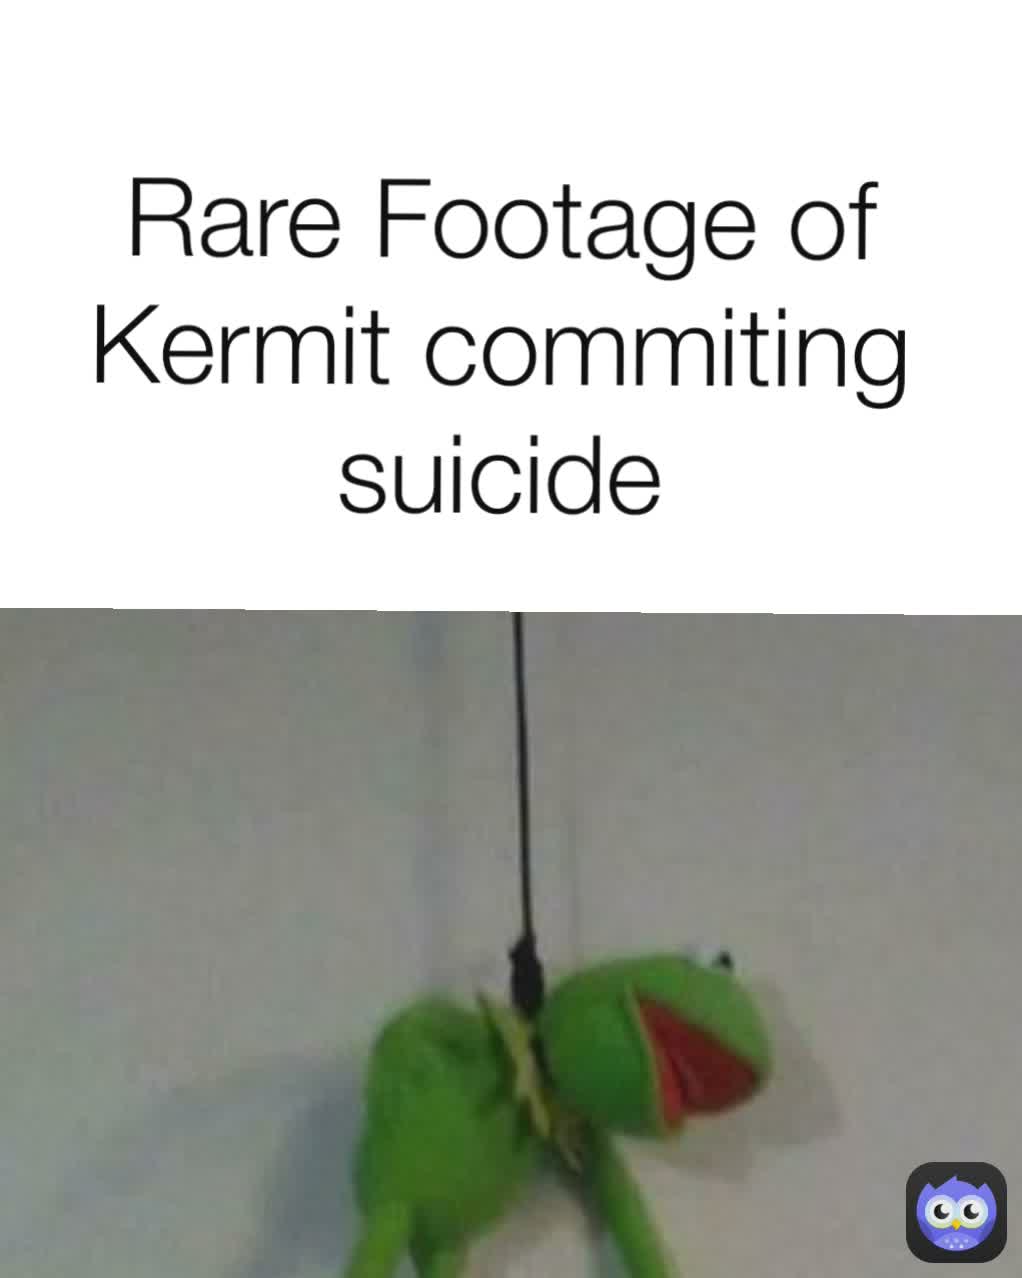 Rare Footage of Kermit commiting suicide